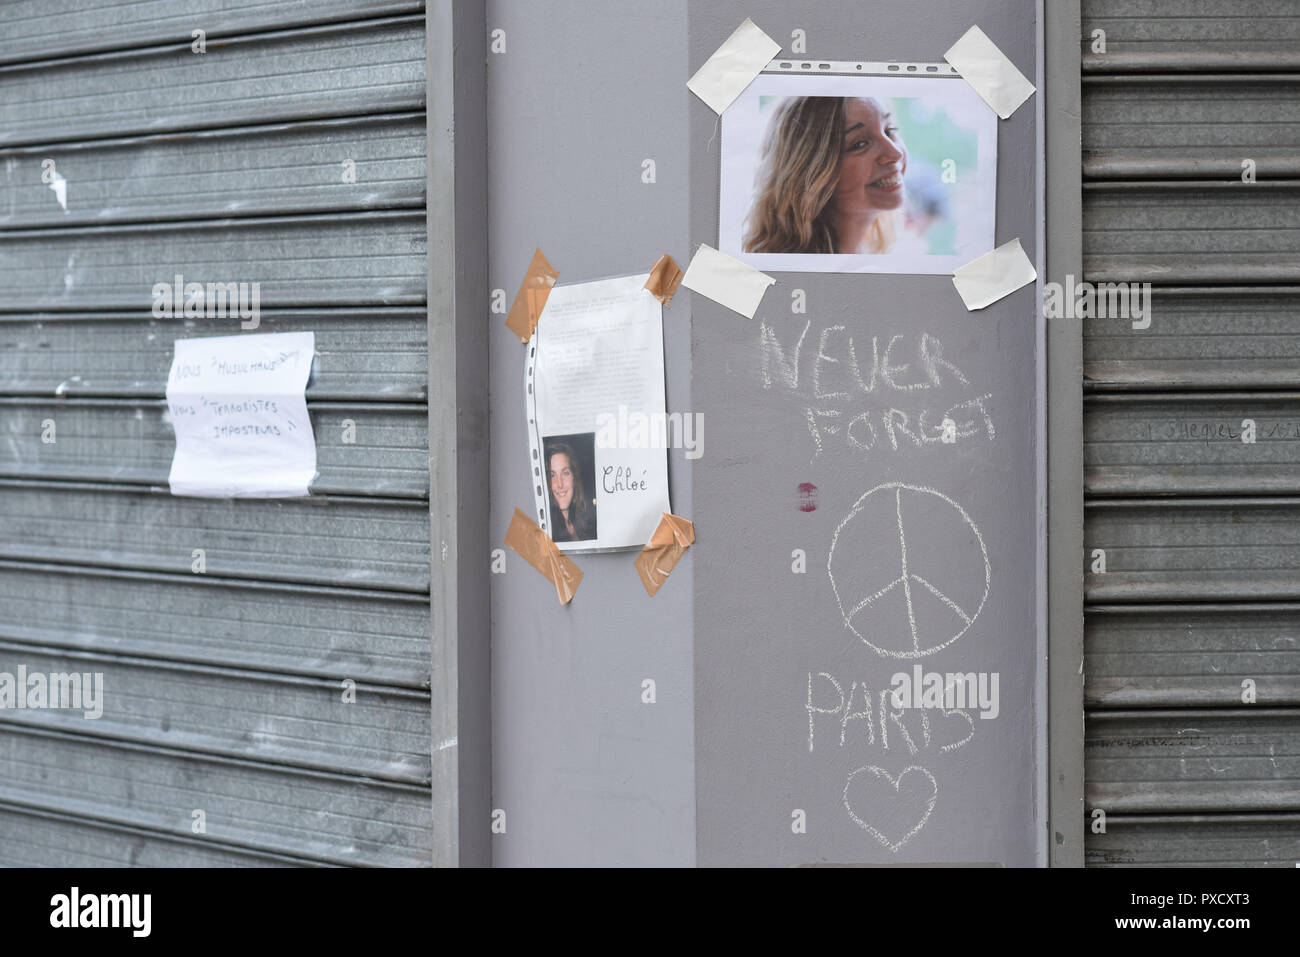 November 22, 2015 - Paris, France: People pay tribute to the victims of the November 13 terror attacks with candles, drawings, street arts, and pictures of the dead with impromptu memorial near the Petit Cambodge restaurant. Des photos des victimes des attaques terroristes du 13 novembre 2015 sont posees au milieu de fleurs le long d'un memorial improvise pres du restaurant le Petit Cambdoge. *** FRANCE OUT / NO SALES TO FRENCH MEDIA *** Stock Photo